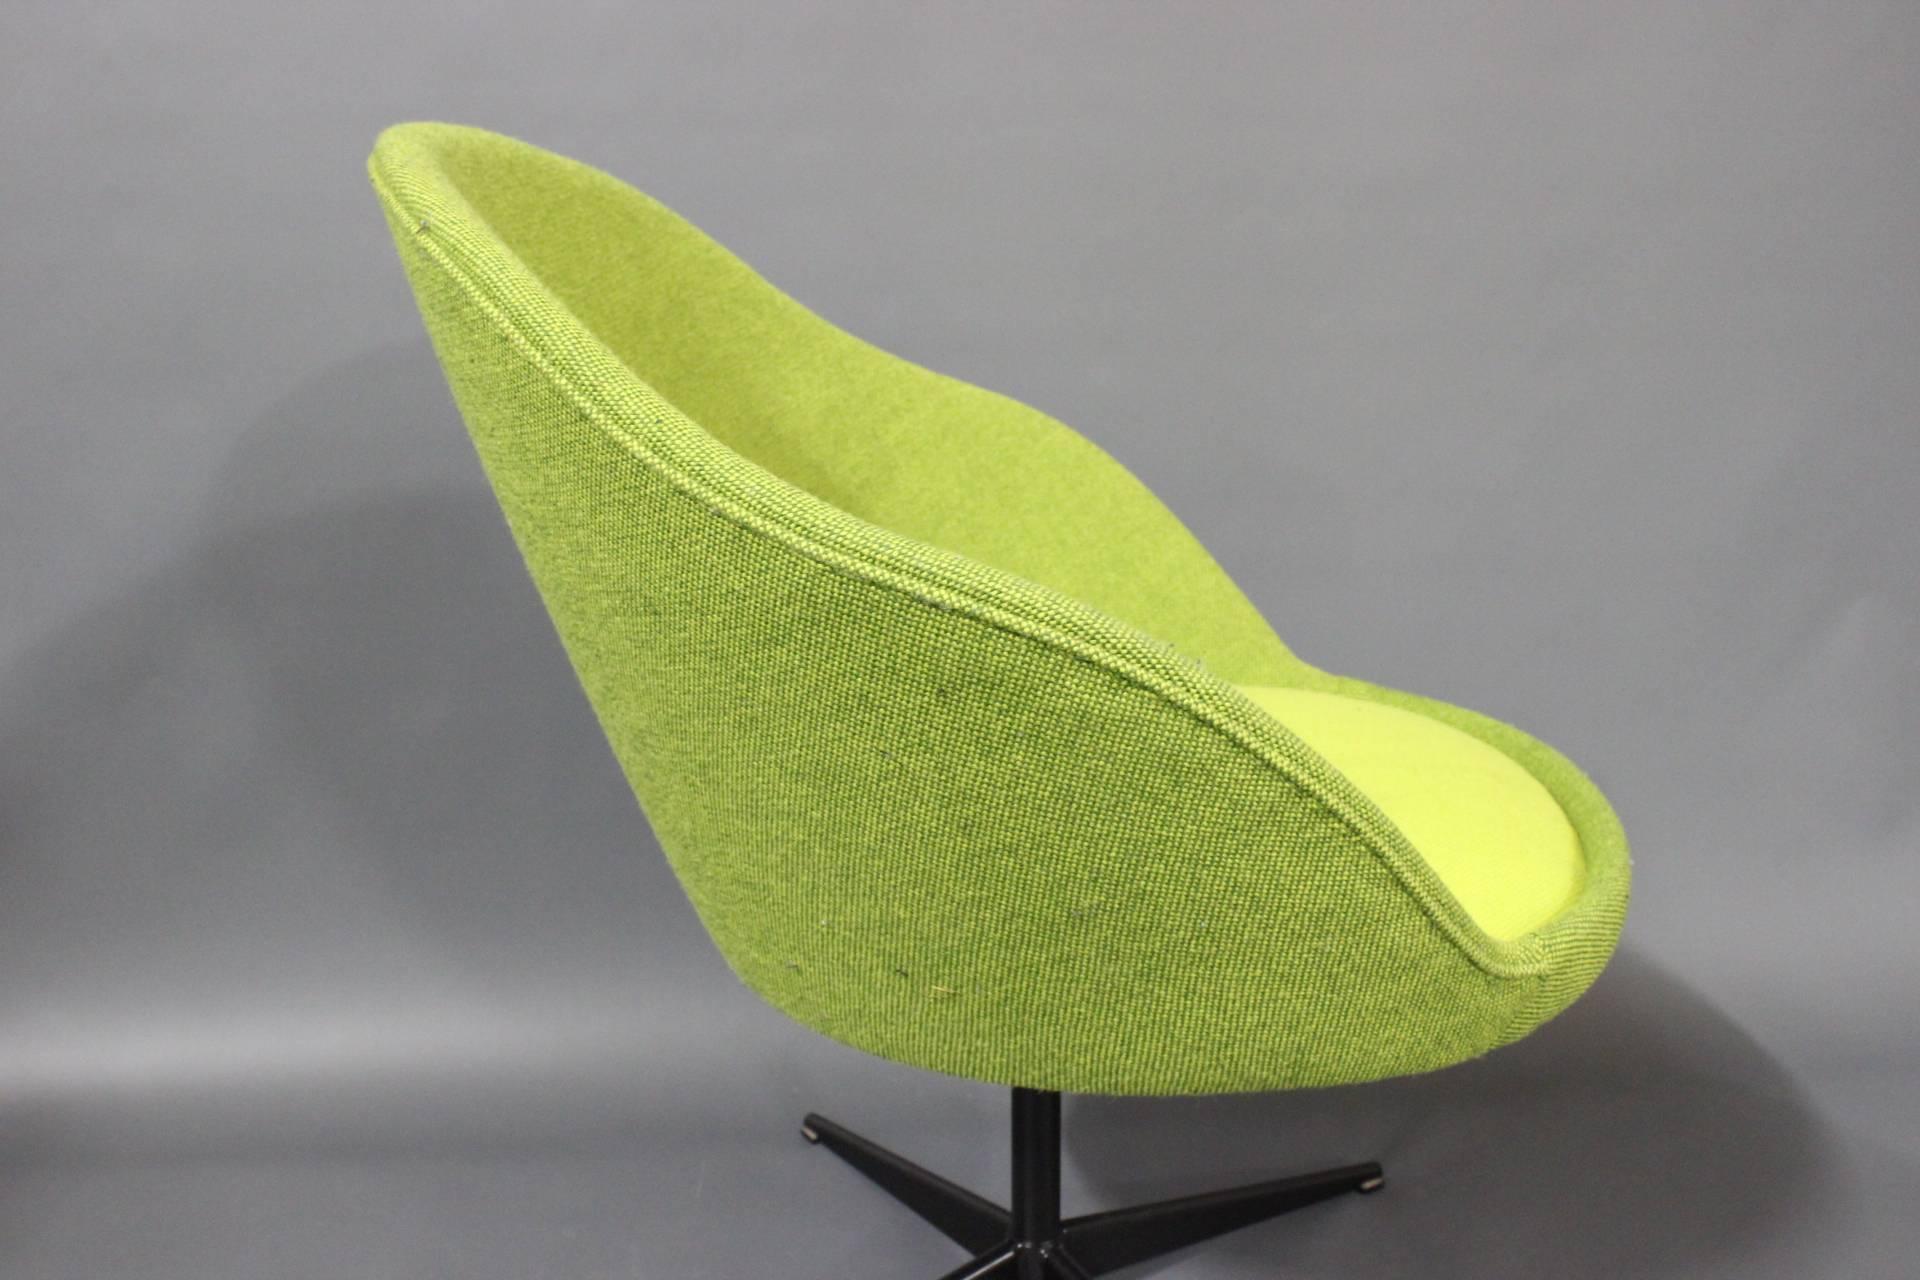 Lounge Chair in Green Hallingdal Wool, Danish Design from the 1960s In Good Condition For Sale In Lejre, DK